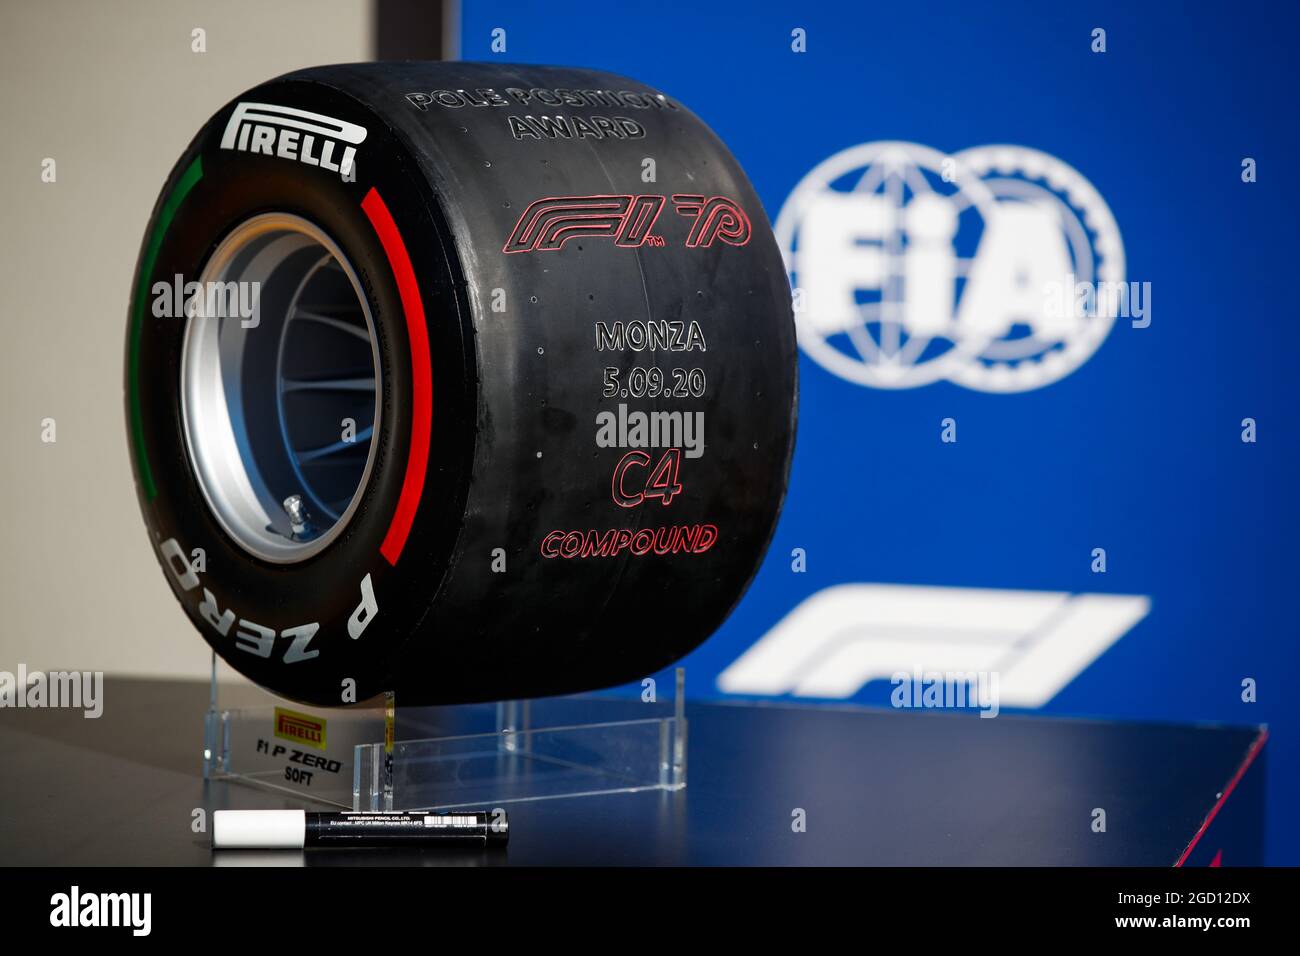 Pirelli Pole Position Award. Italian Grand Prix, Saturday 5th September 2020. Monza Italy. FIA Pool Image for Editorial Use Only Stock Photo